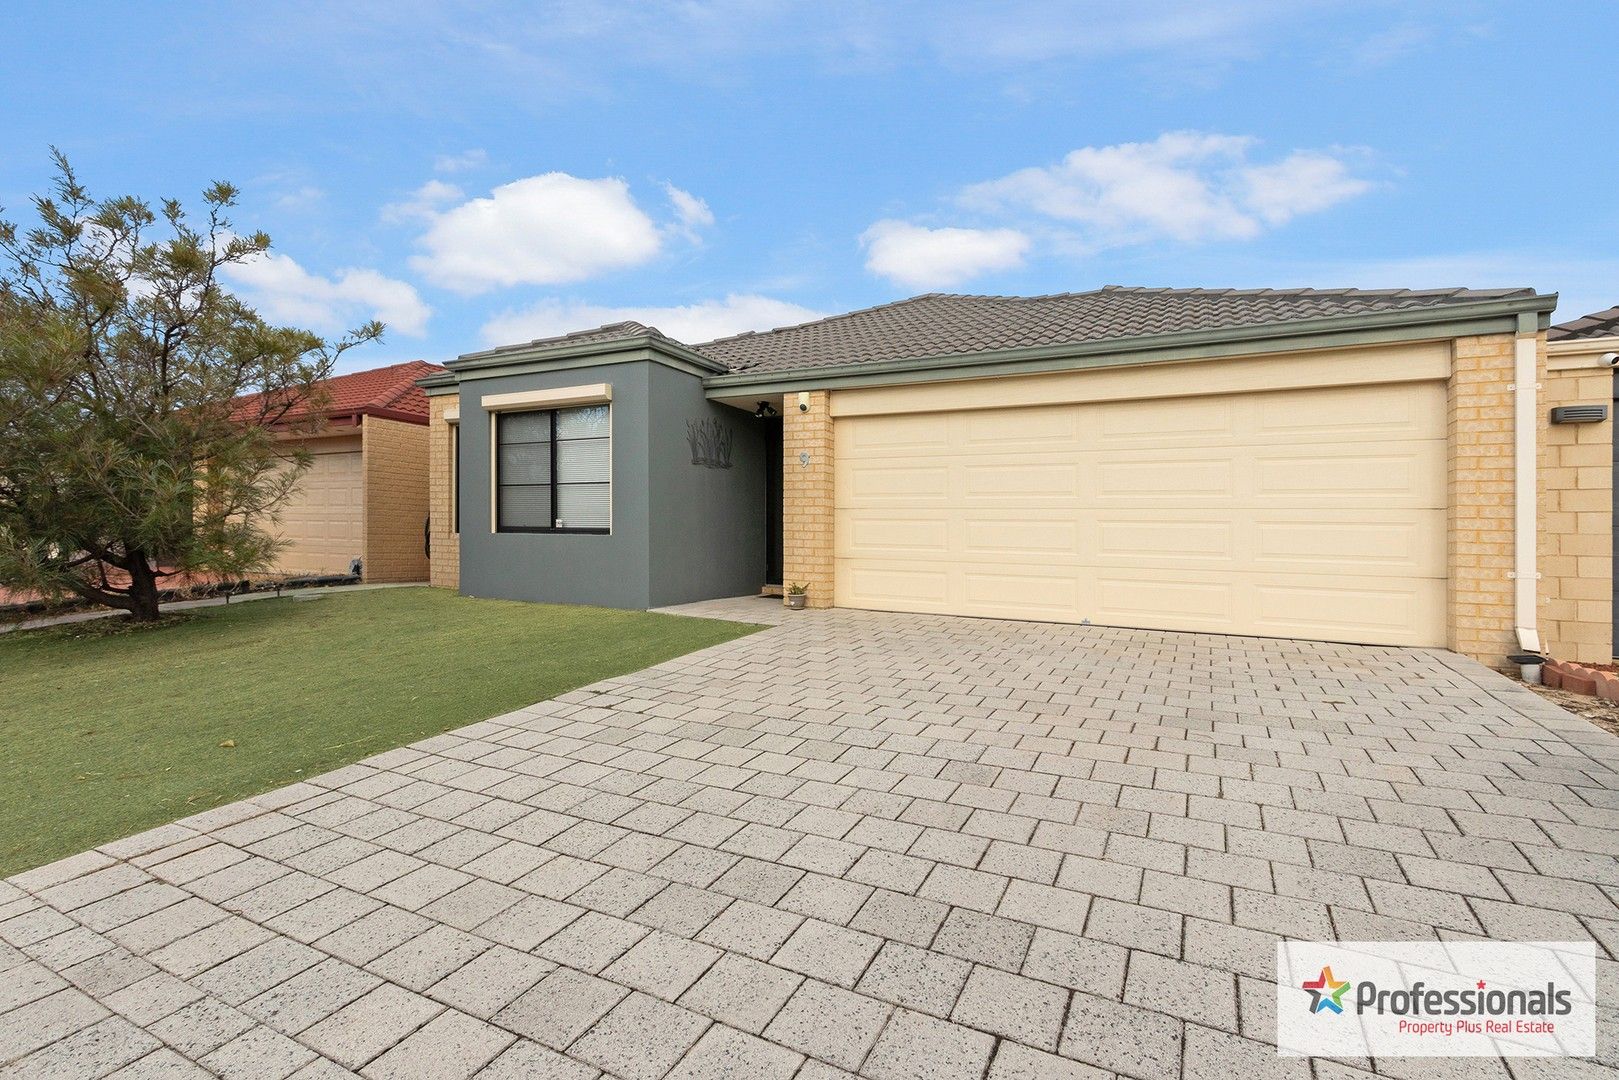 3 bedrooms House in 9 Sparnam Street CANNING VALE WA, 6155